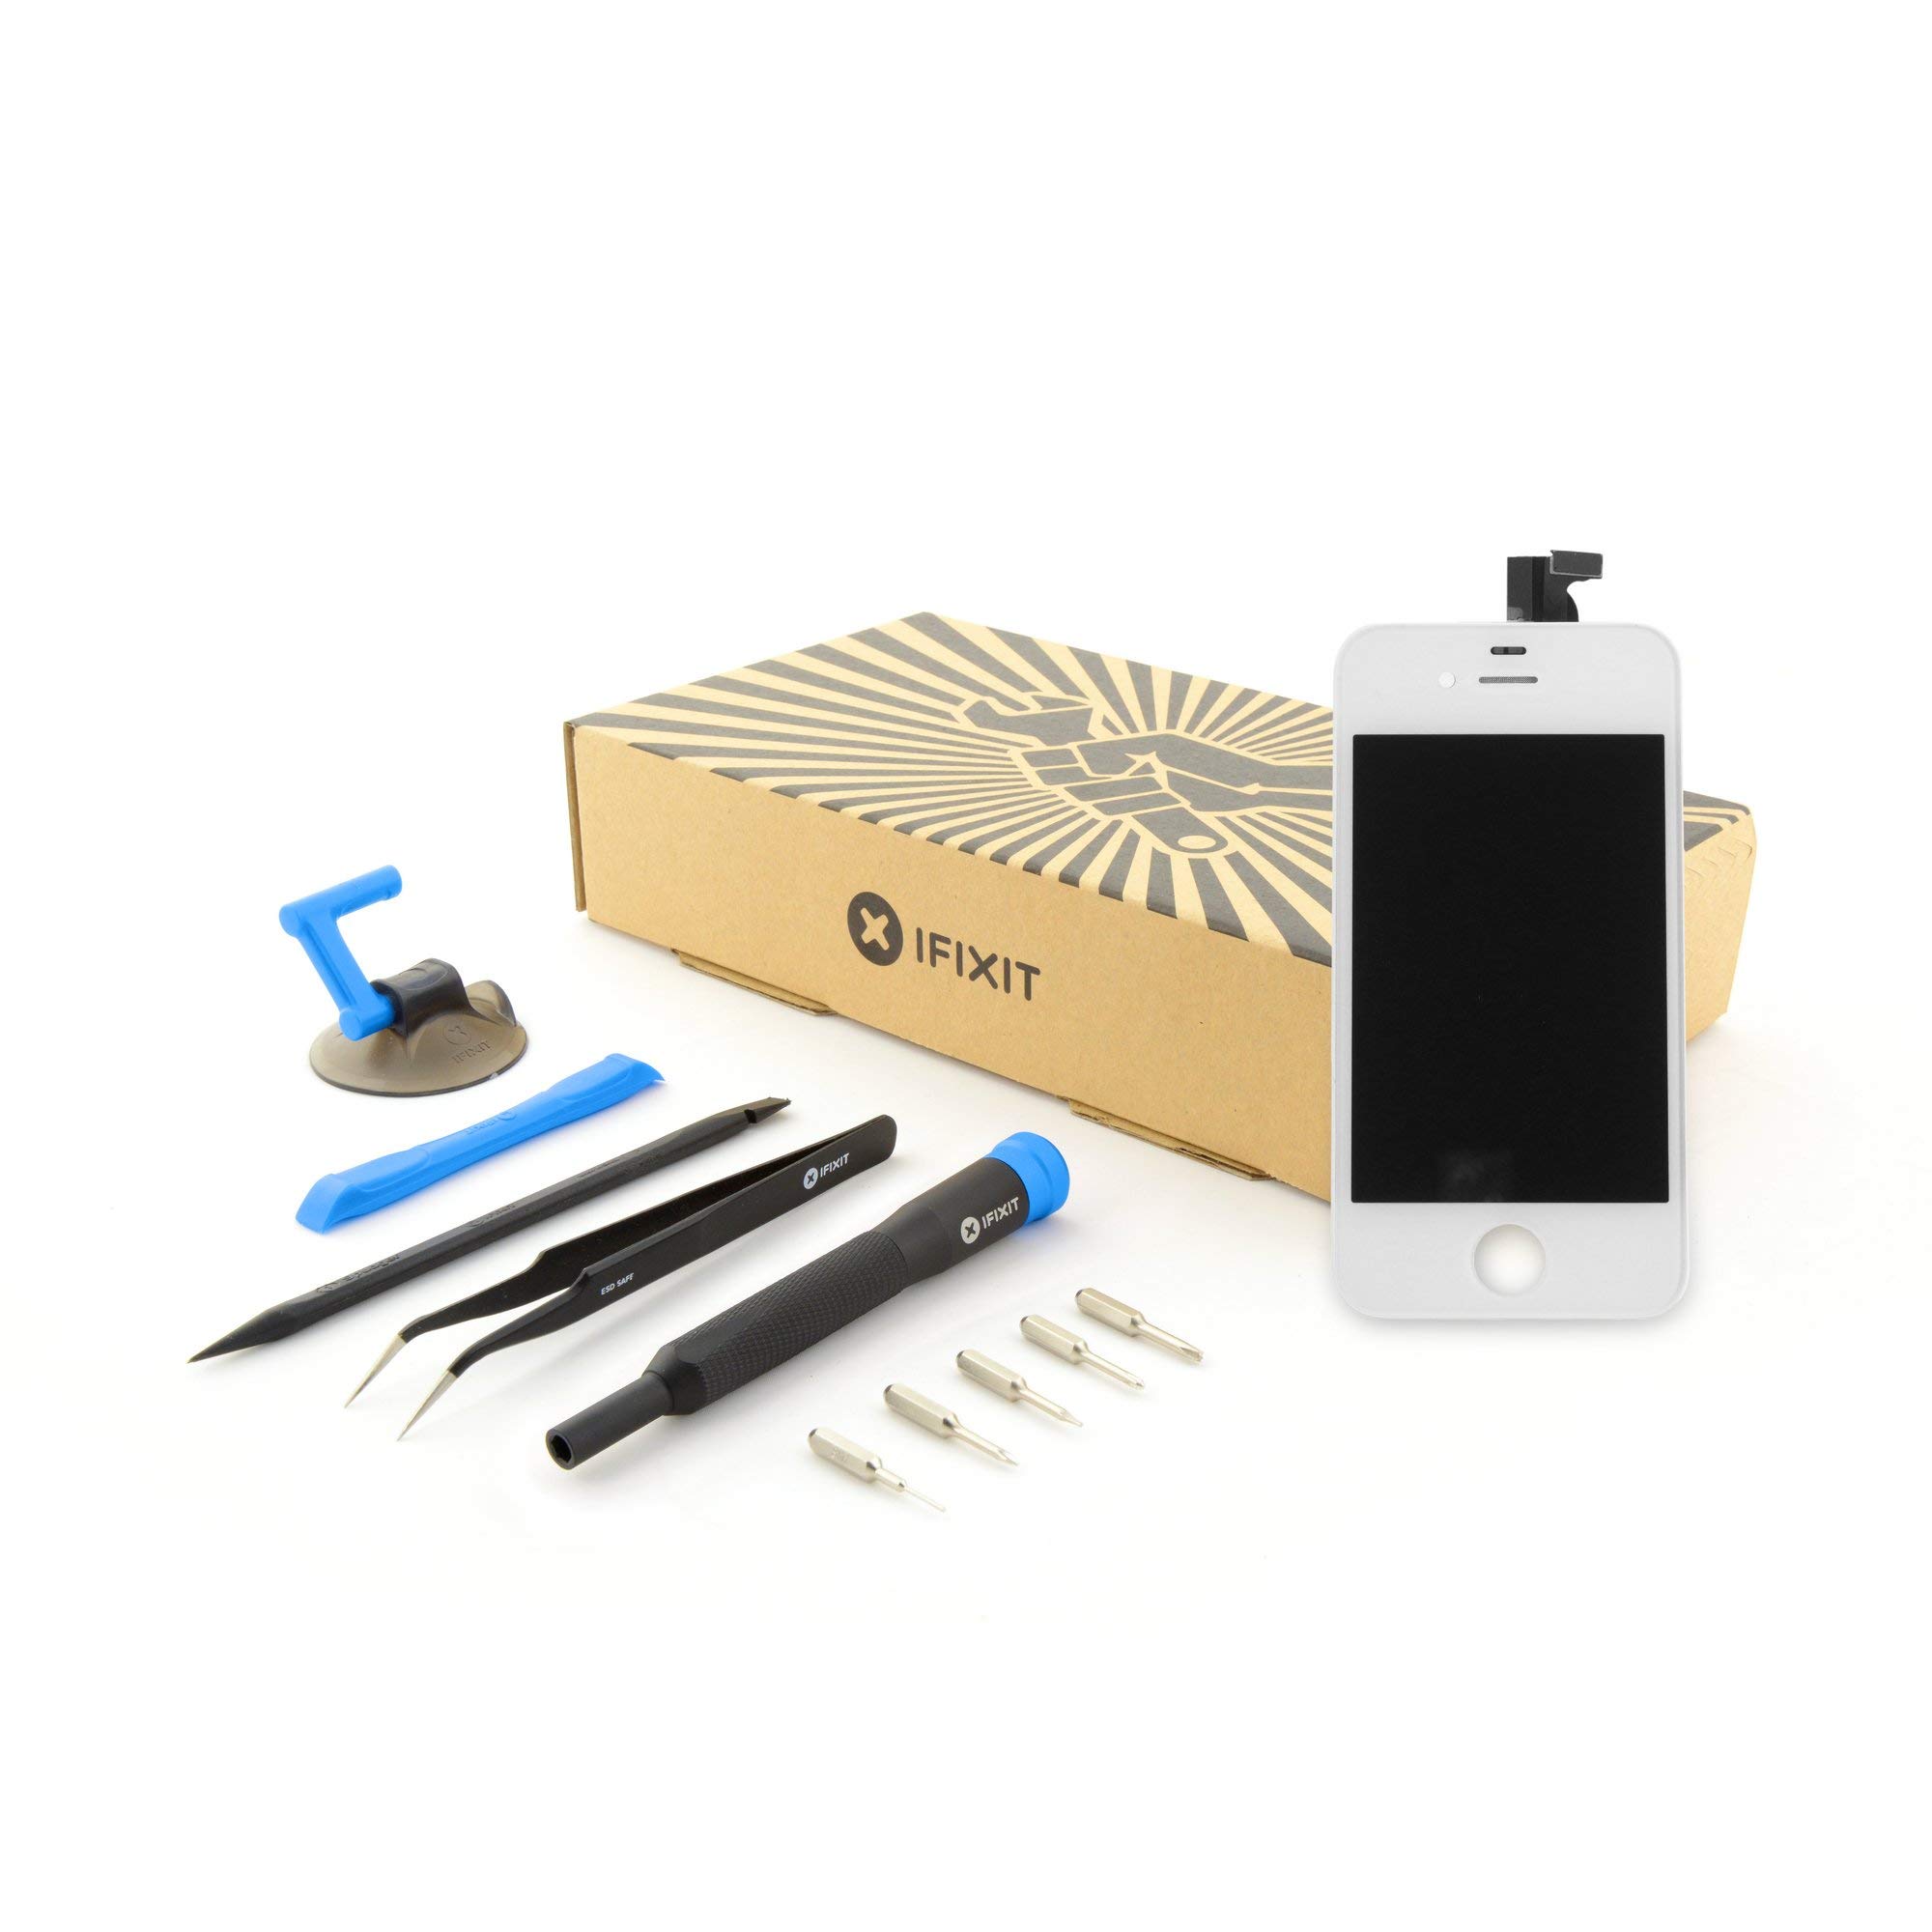 iPhone 4S home button replacement kit